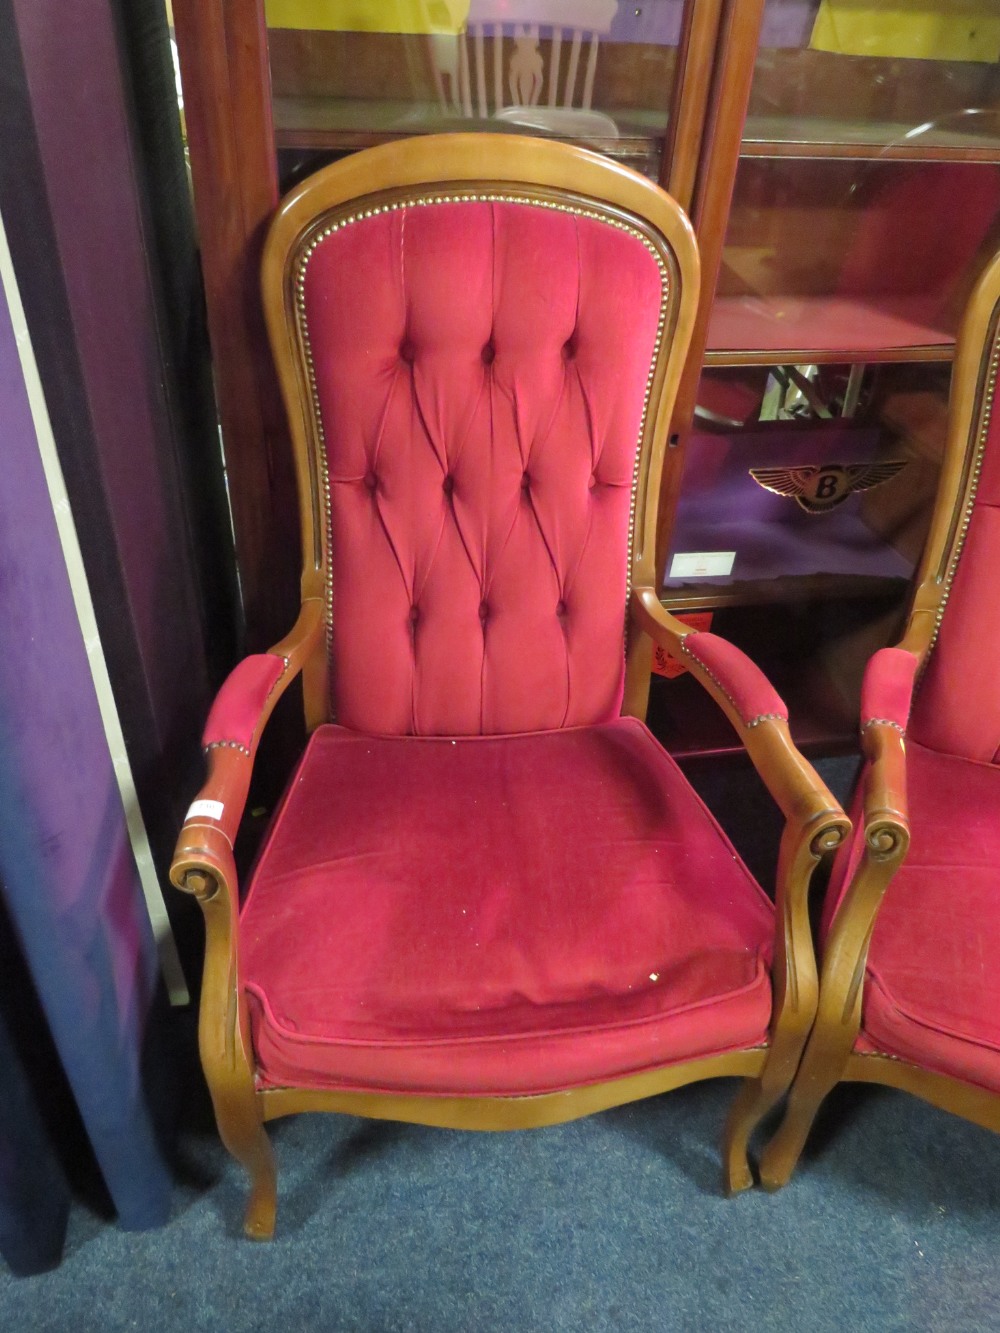 A PAIR OF MODERN UPHOLSTERED CHAIRS - Image 3 of 4